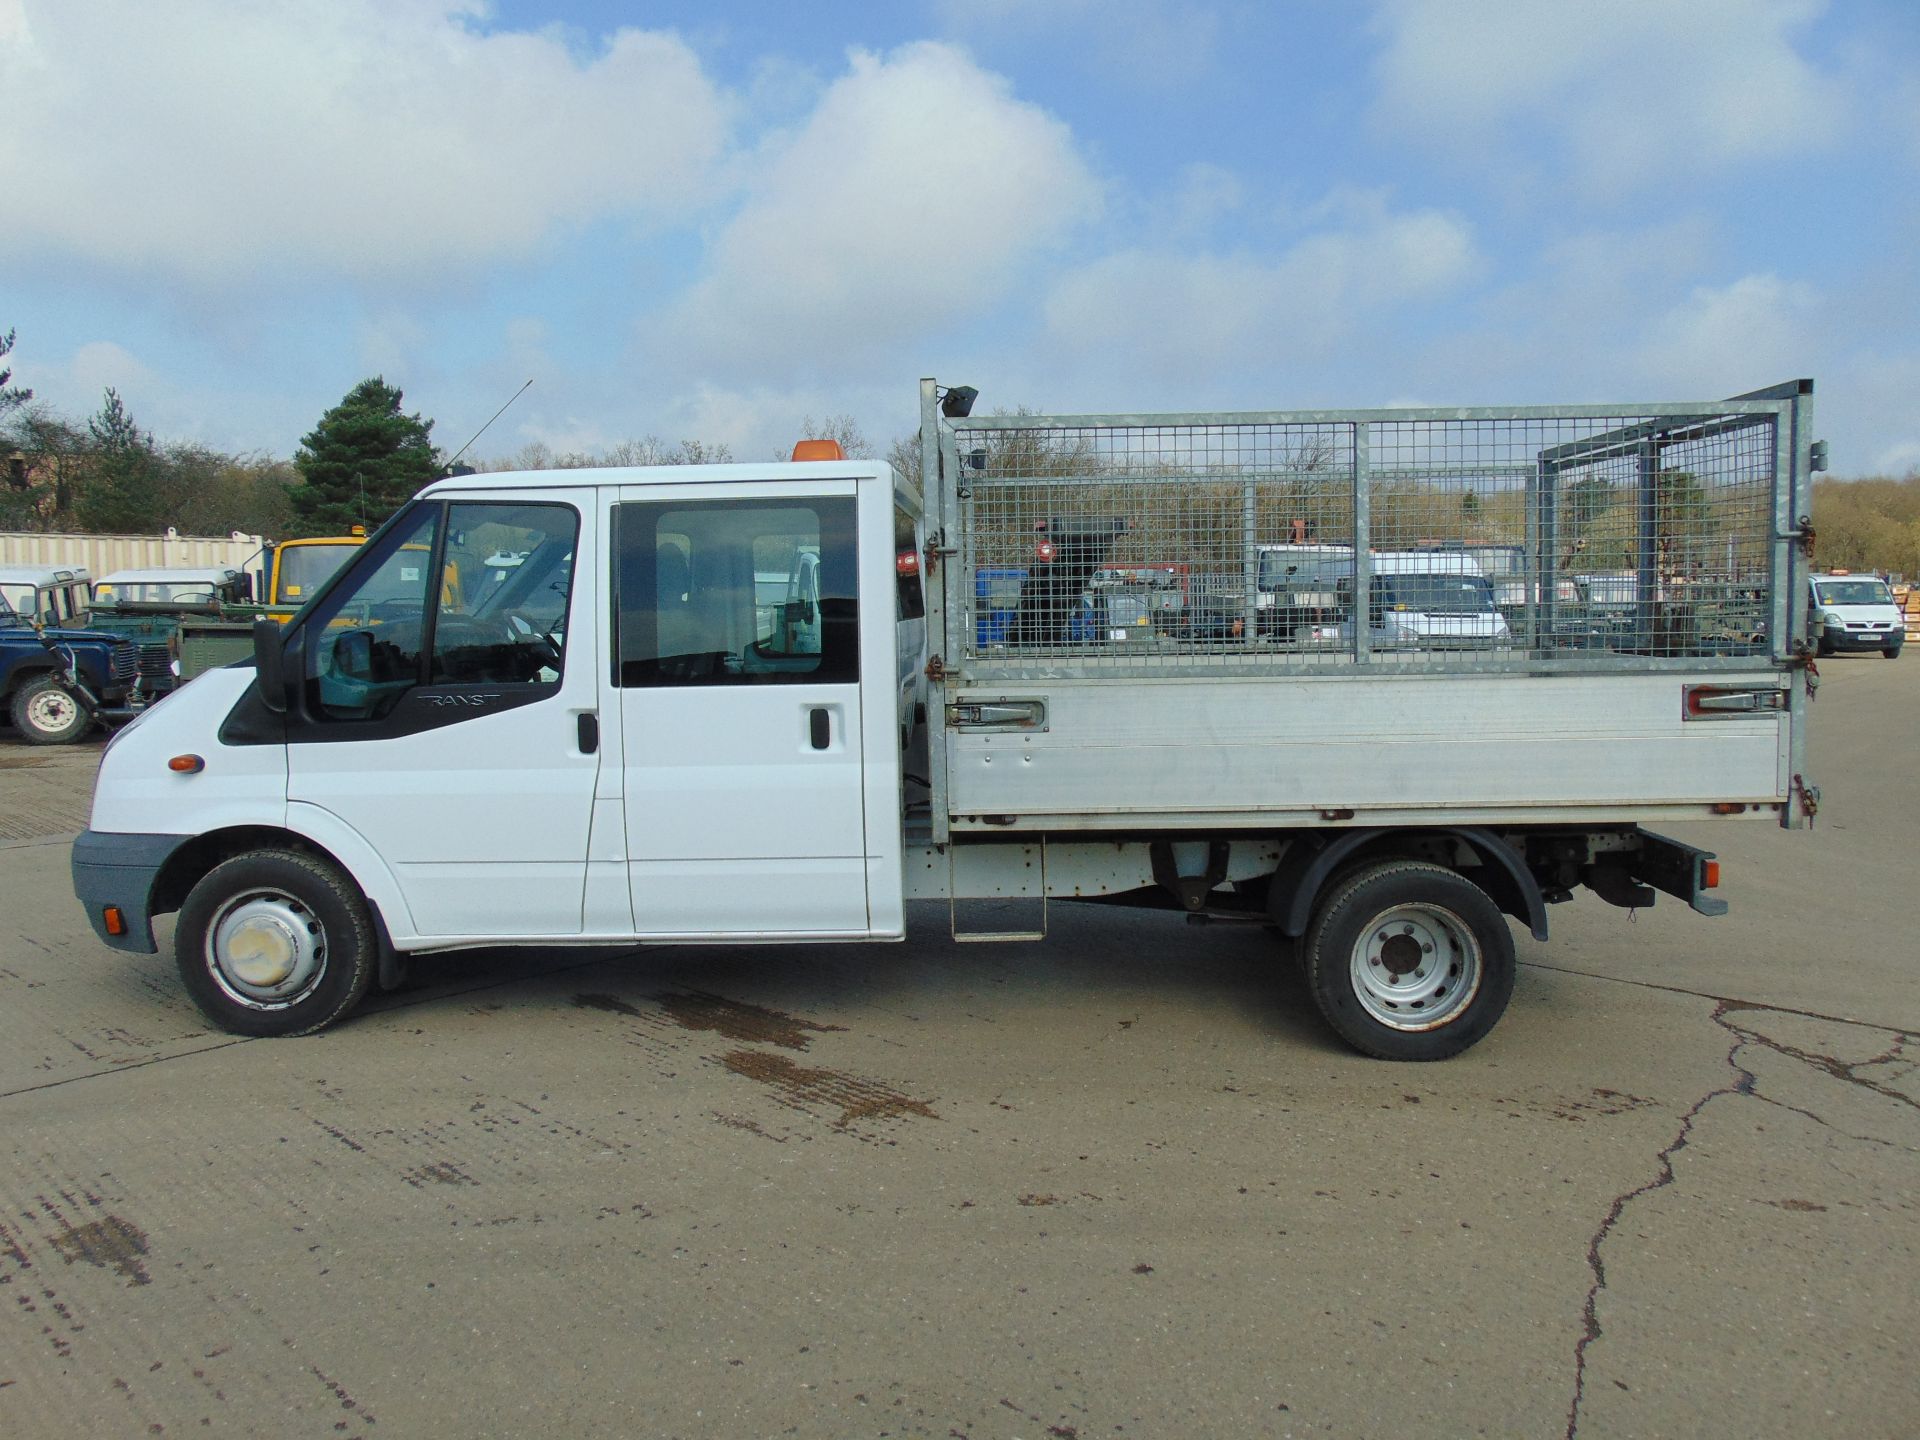 2008 Ford Transit 115 T350 Crew Cab Flat Bed Tipper - Image 4 of 16